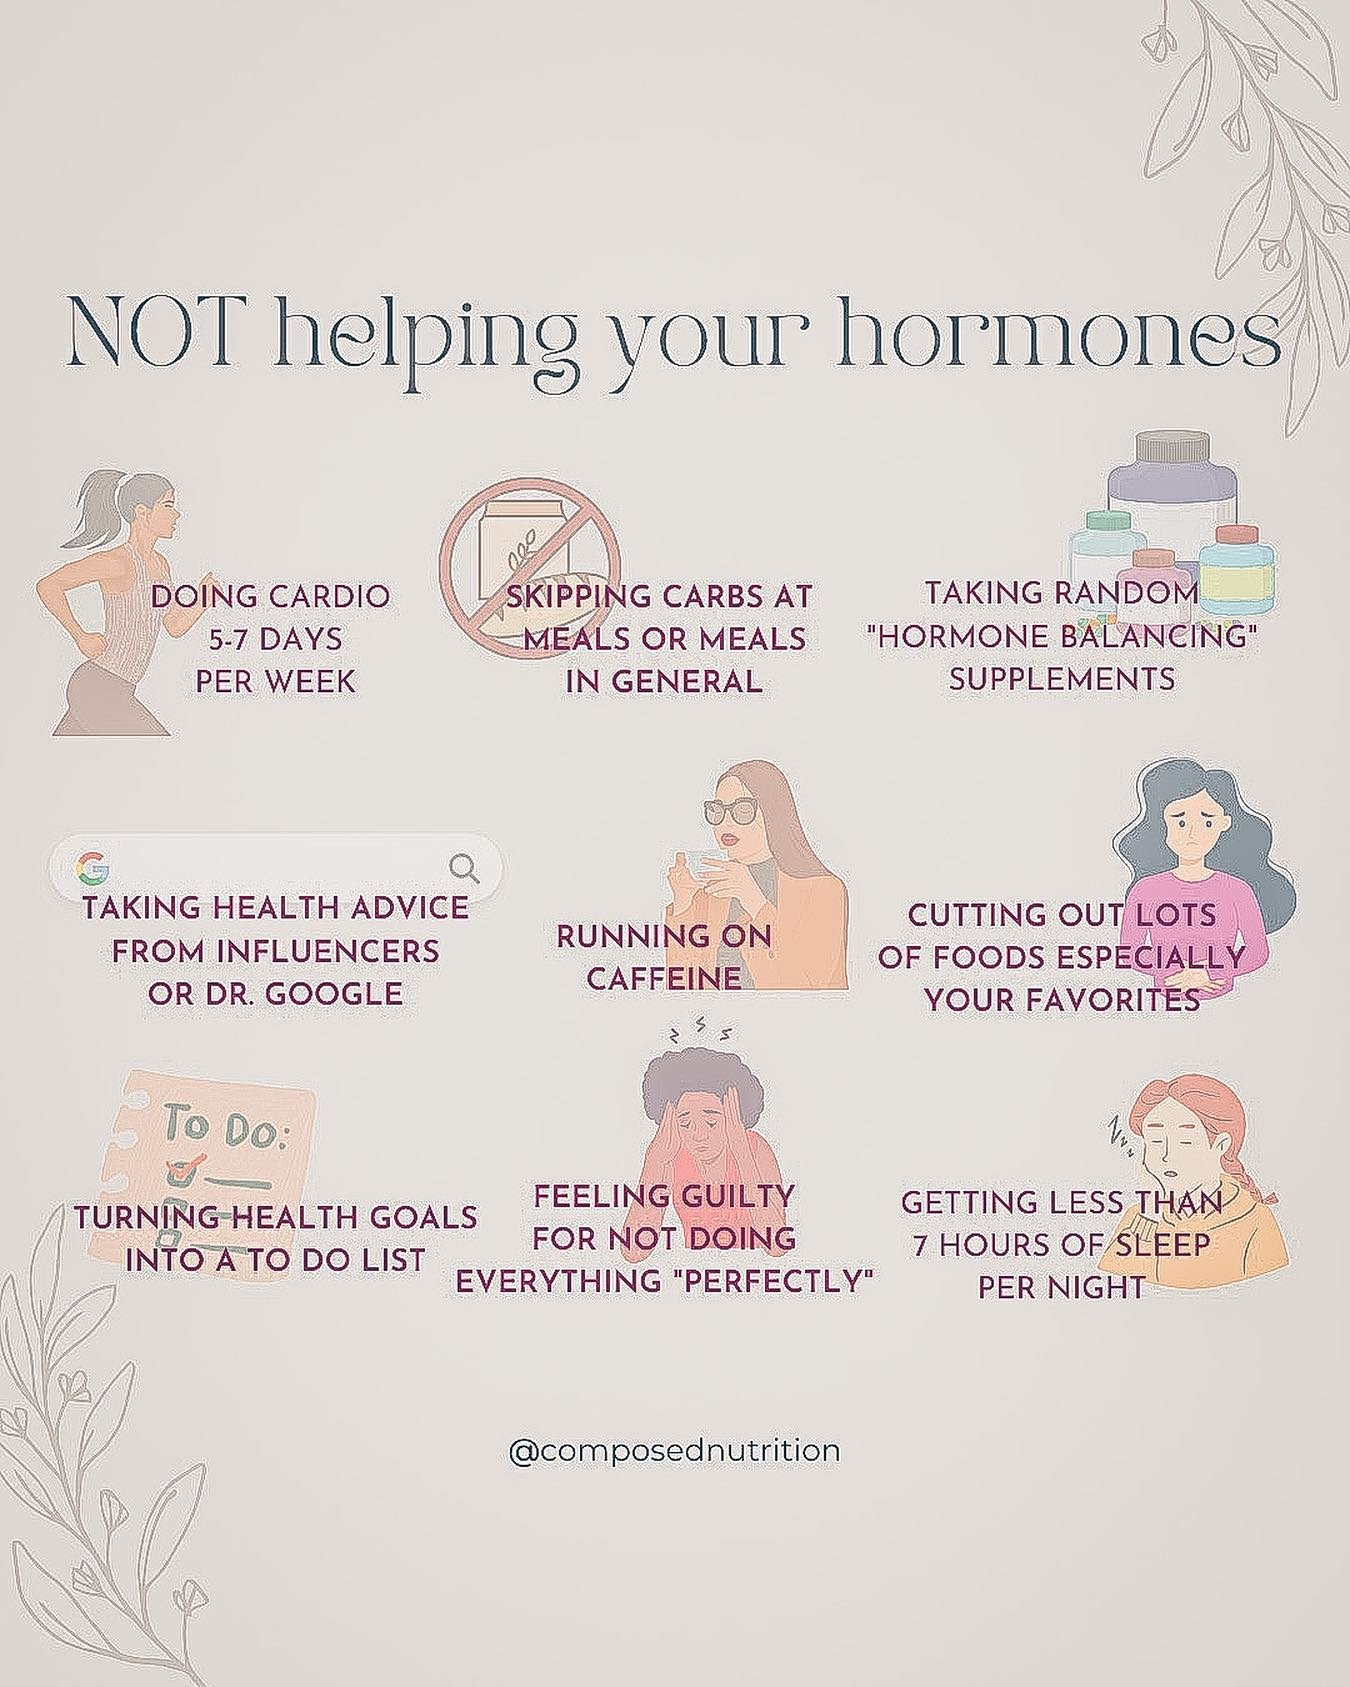 WHAT CAN HELP ⬇️

If you feel like there MUST be something else you can do for your period symptoms besides birth control or a medication&hellip;

There is!

Conventional medicine tools are absolutely needed: testing (like ultrasound, MRI), surgery, 